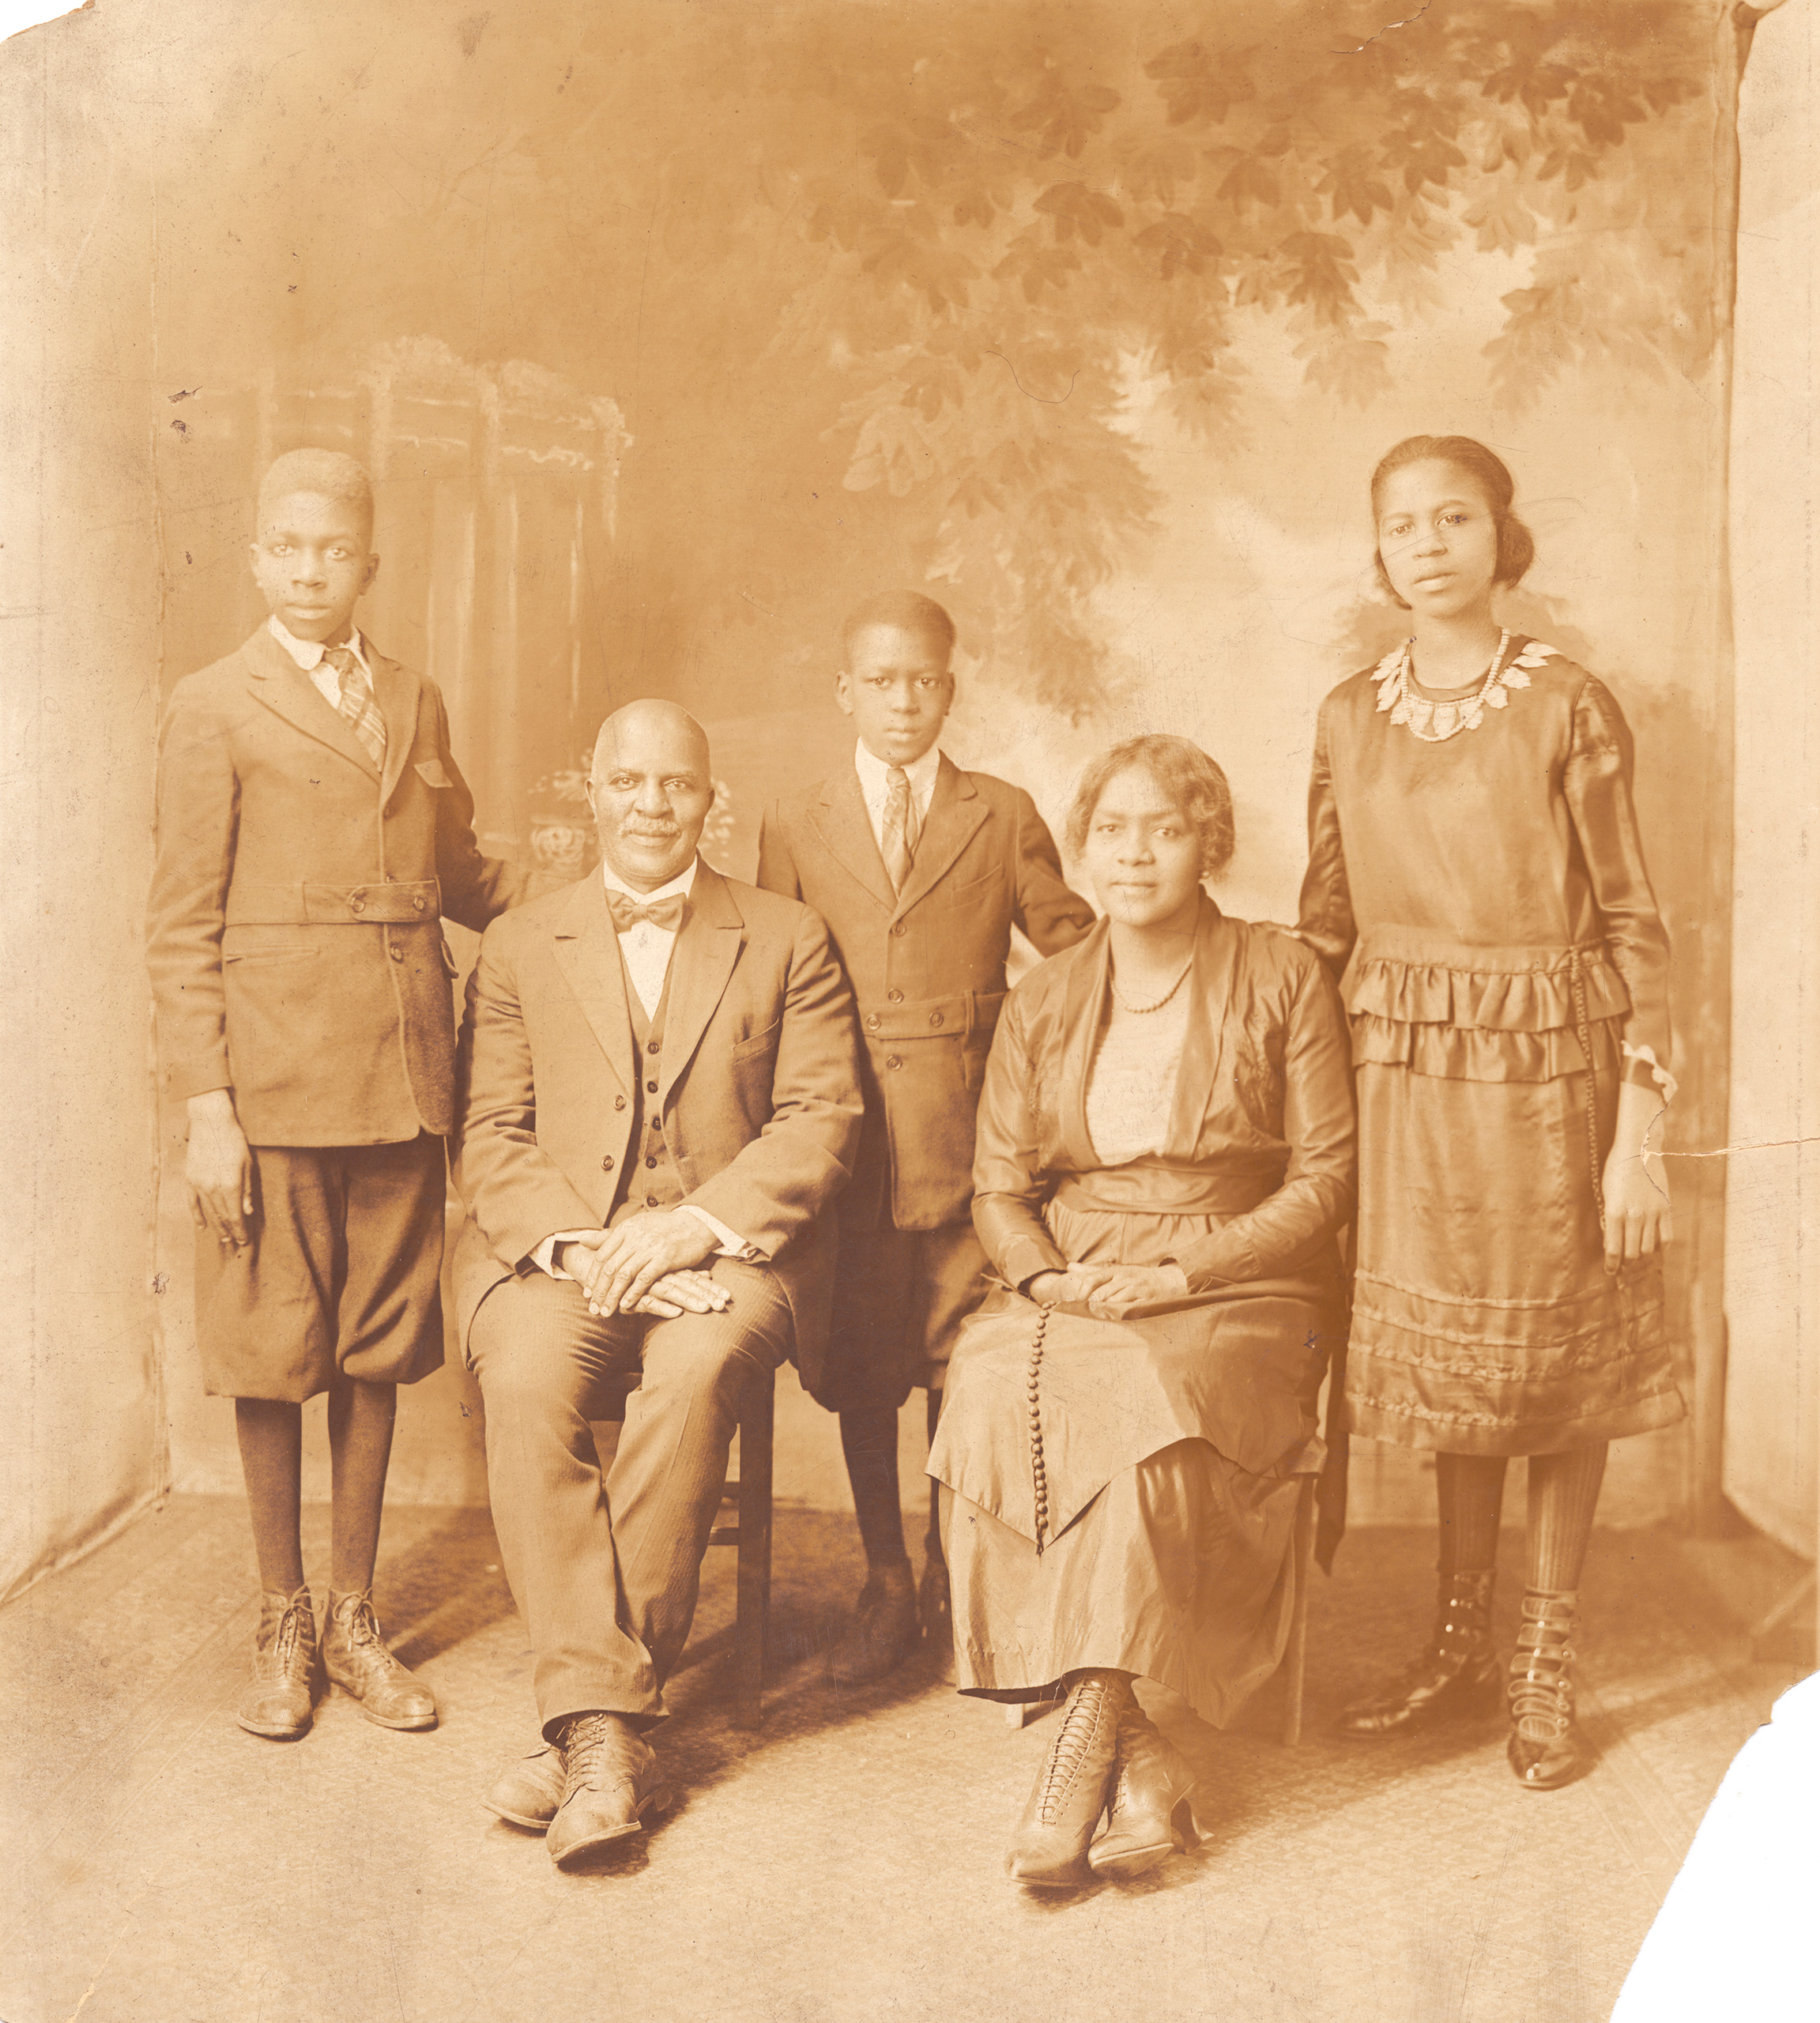 The Morris Family during the Great Migration